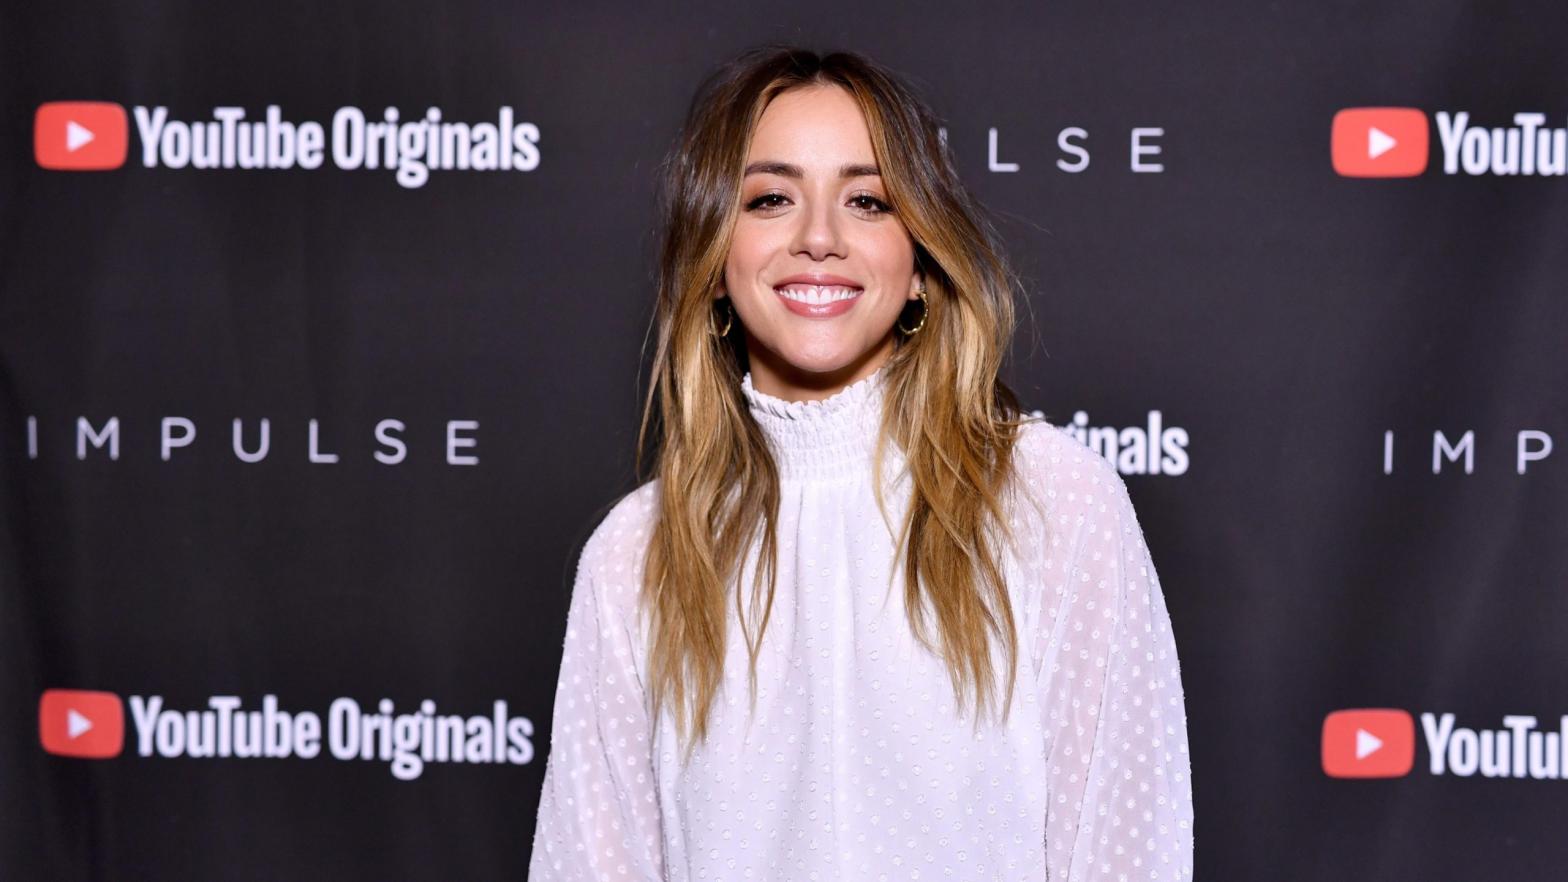 Chloe Bennet at a YouTube Originals event in 2019. (Photo: Emma McIntyre/Getty Images for YouTube Originals, Getty Images)